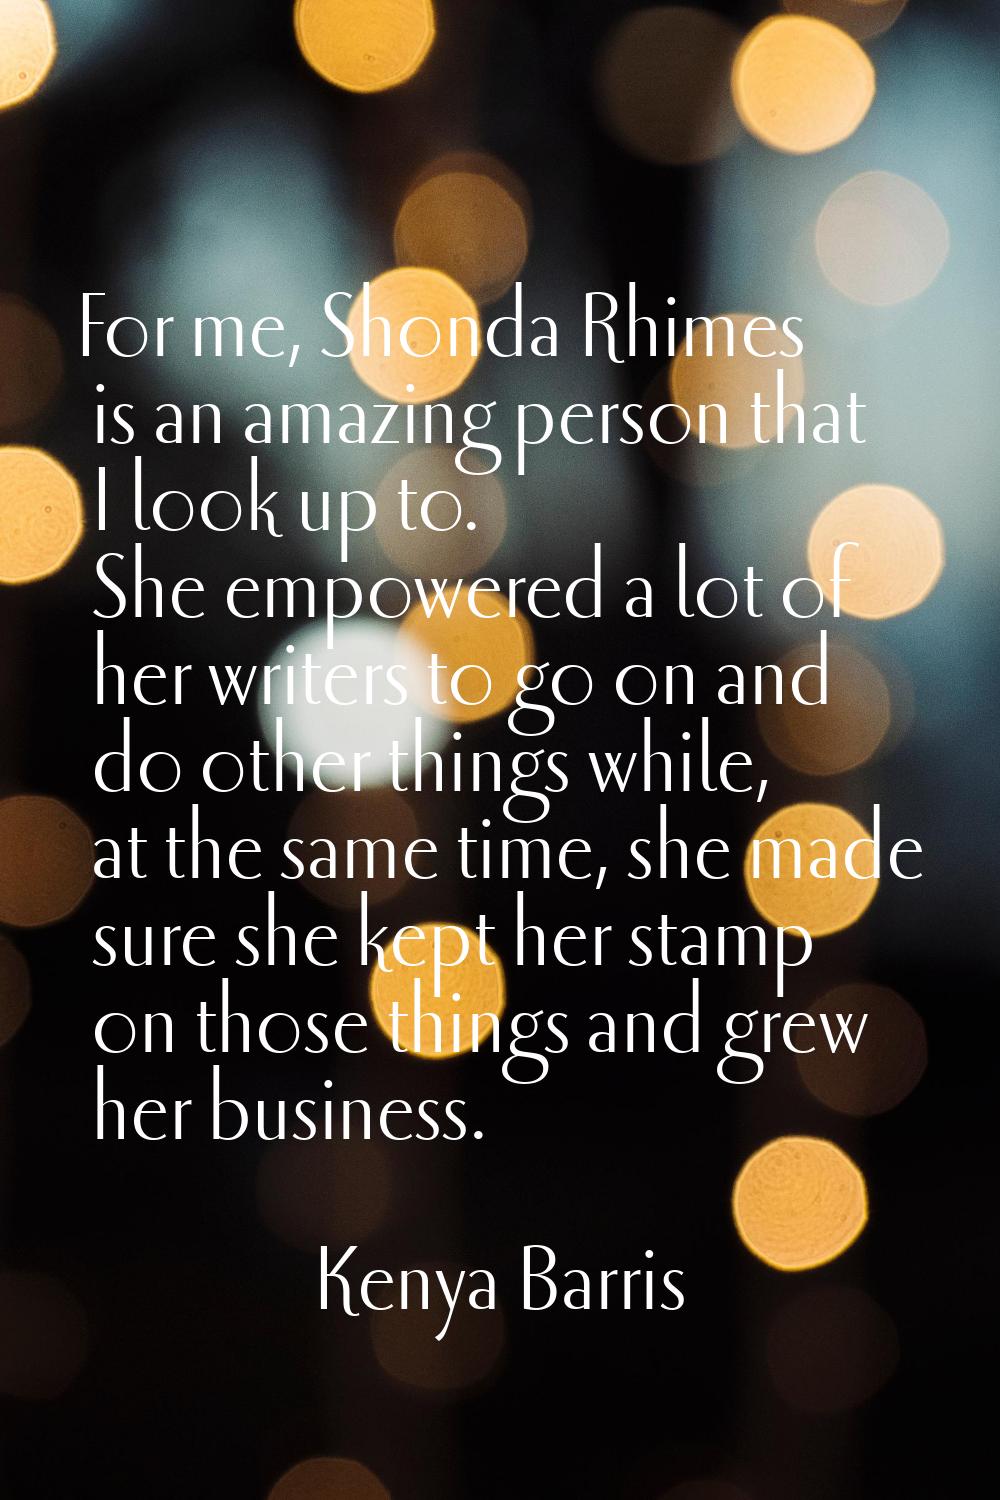 For me, Shonda Rhimes is an amazing person that I look up to. She empowered a lot of her writers to